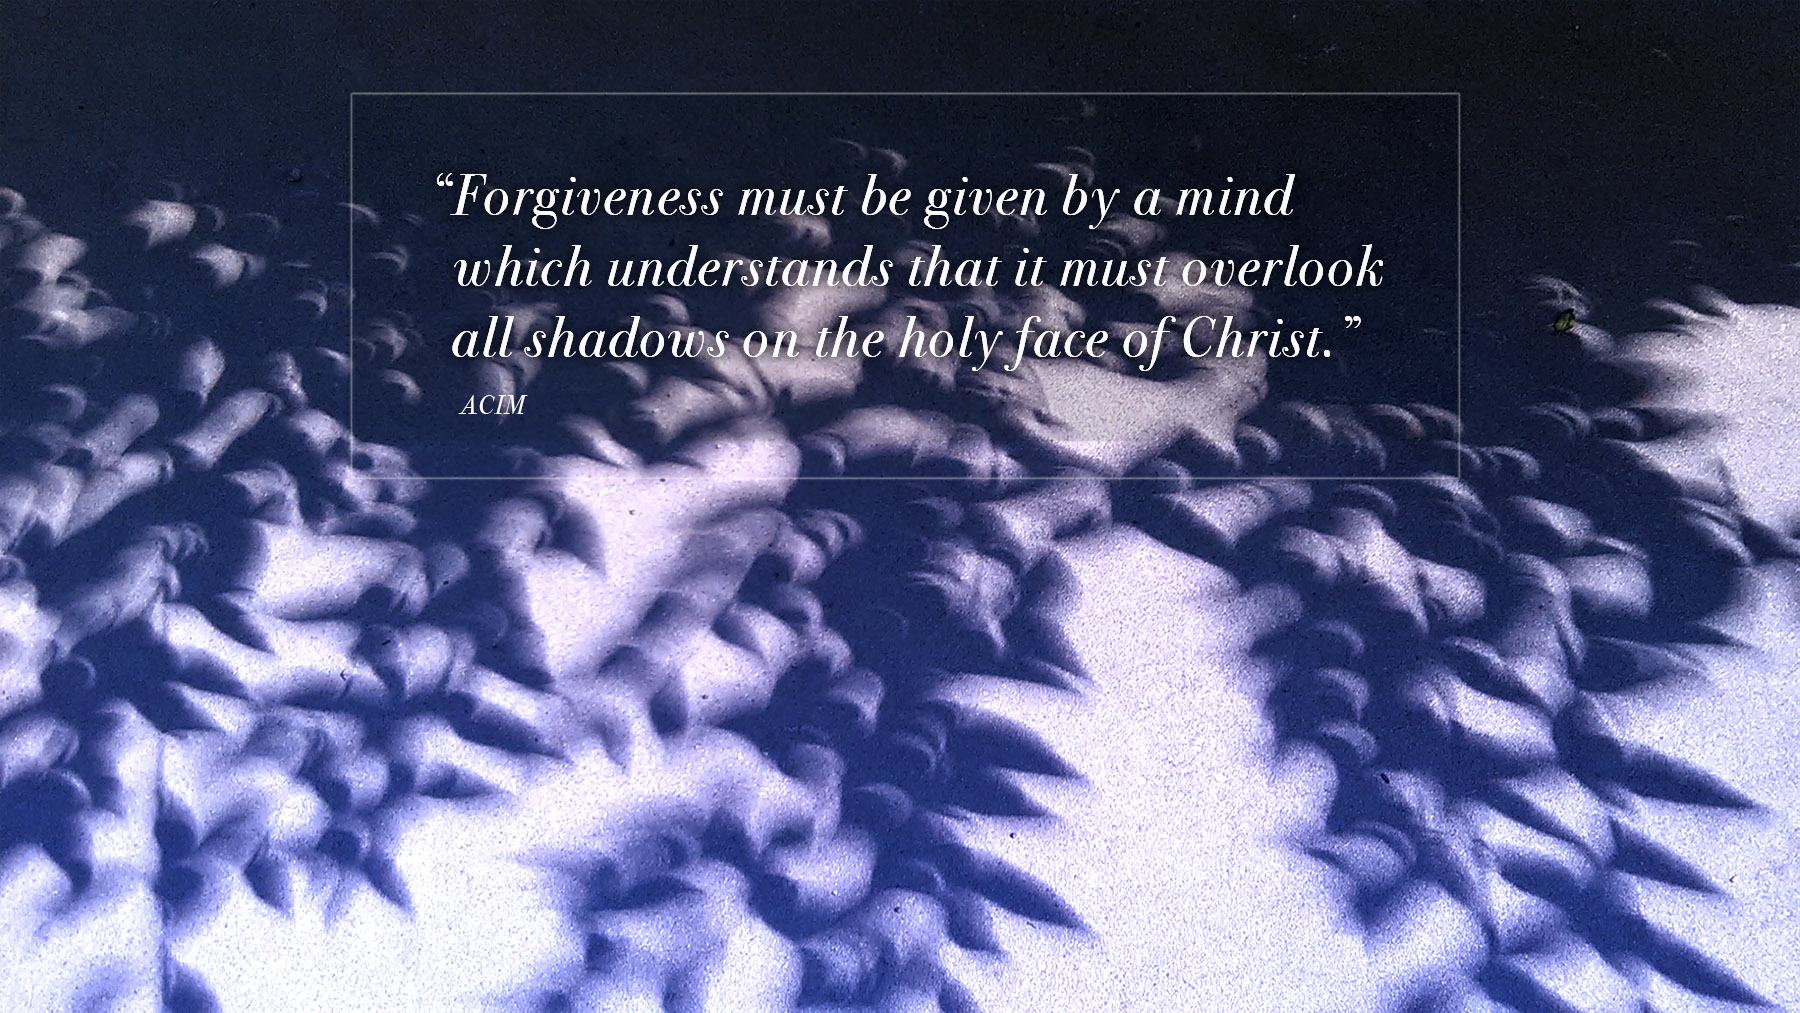 Forgiveness must be given by a mind which understands that it must overlook all shadows on the holy face of Christ